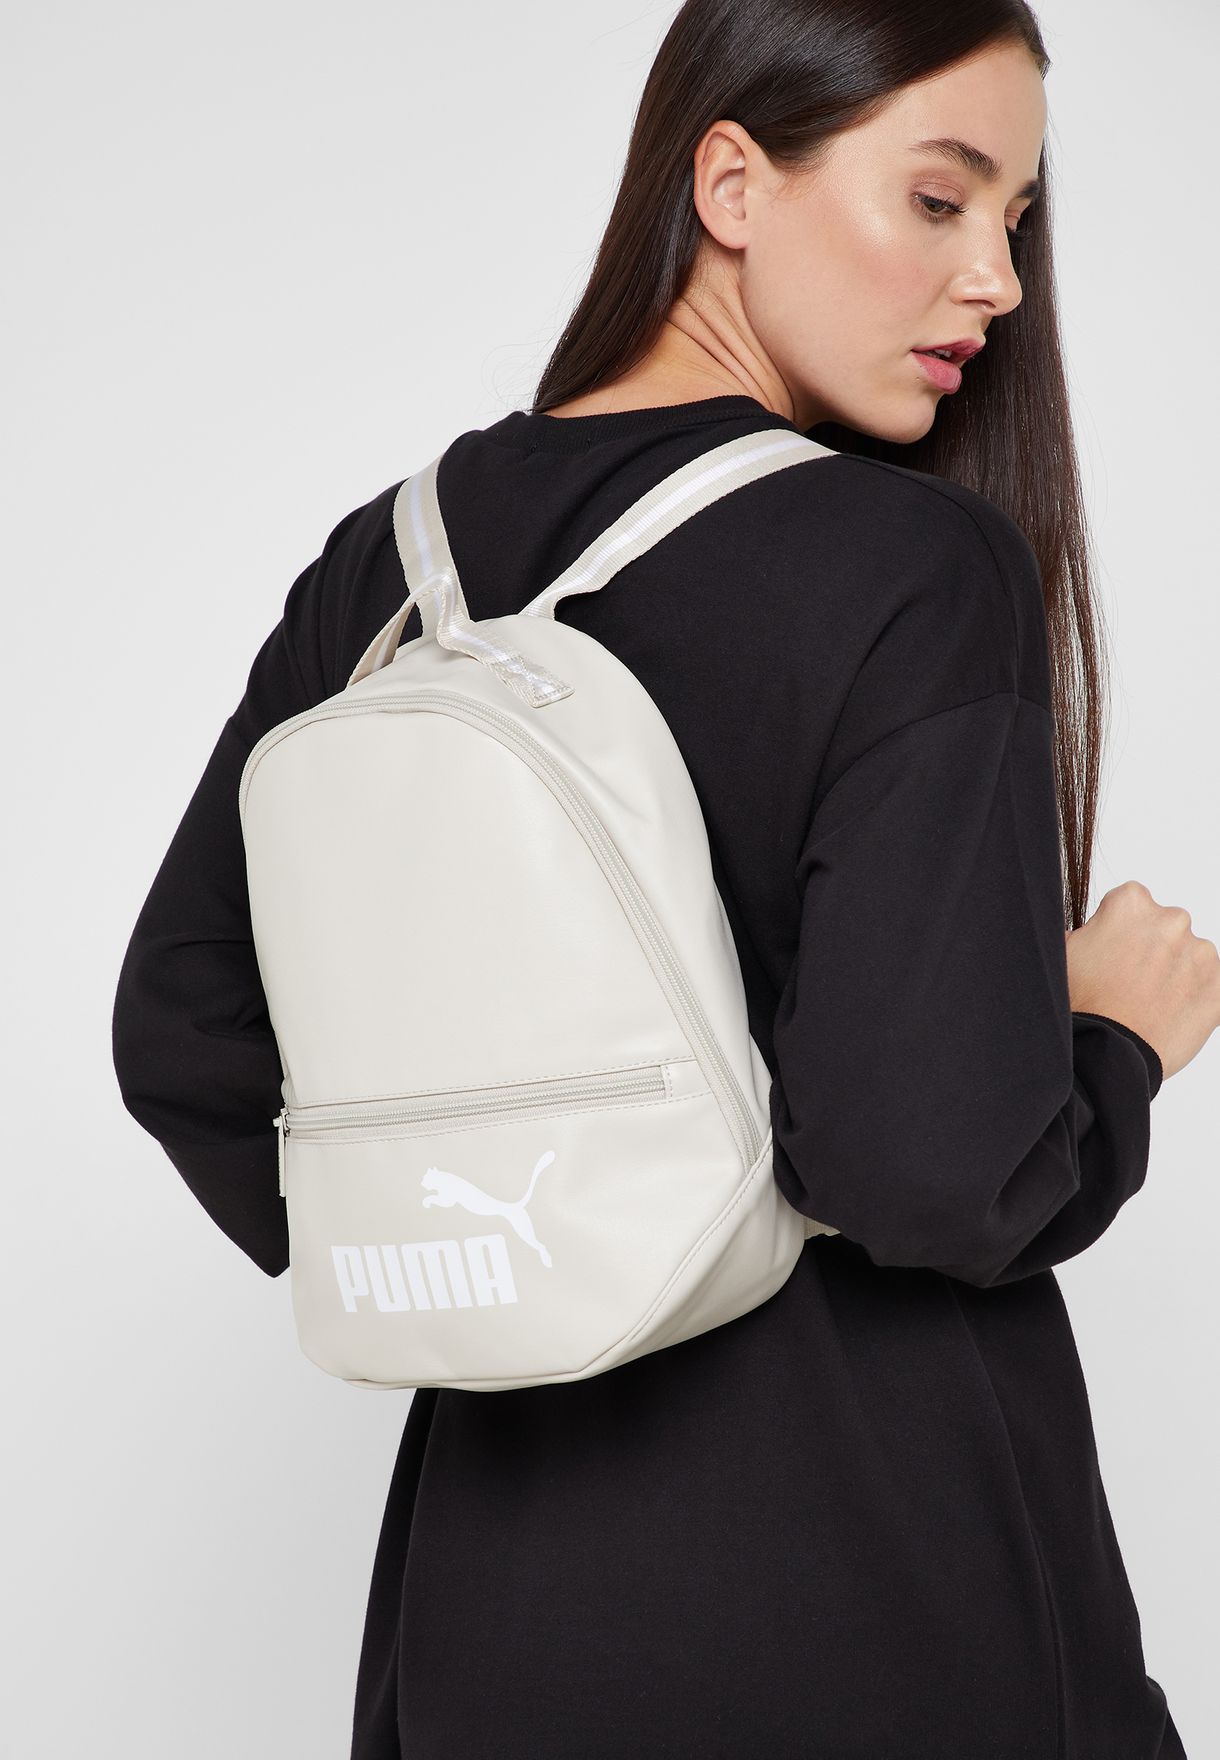 puma archive backpack